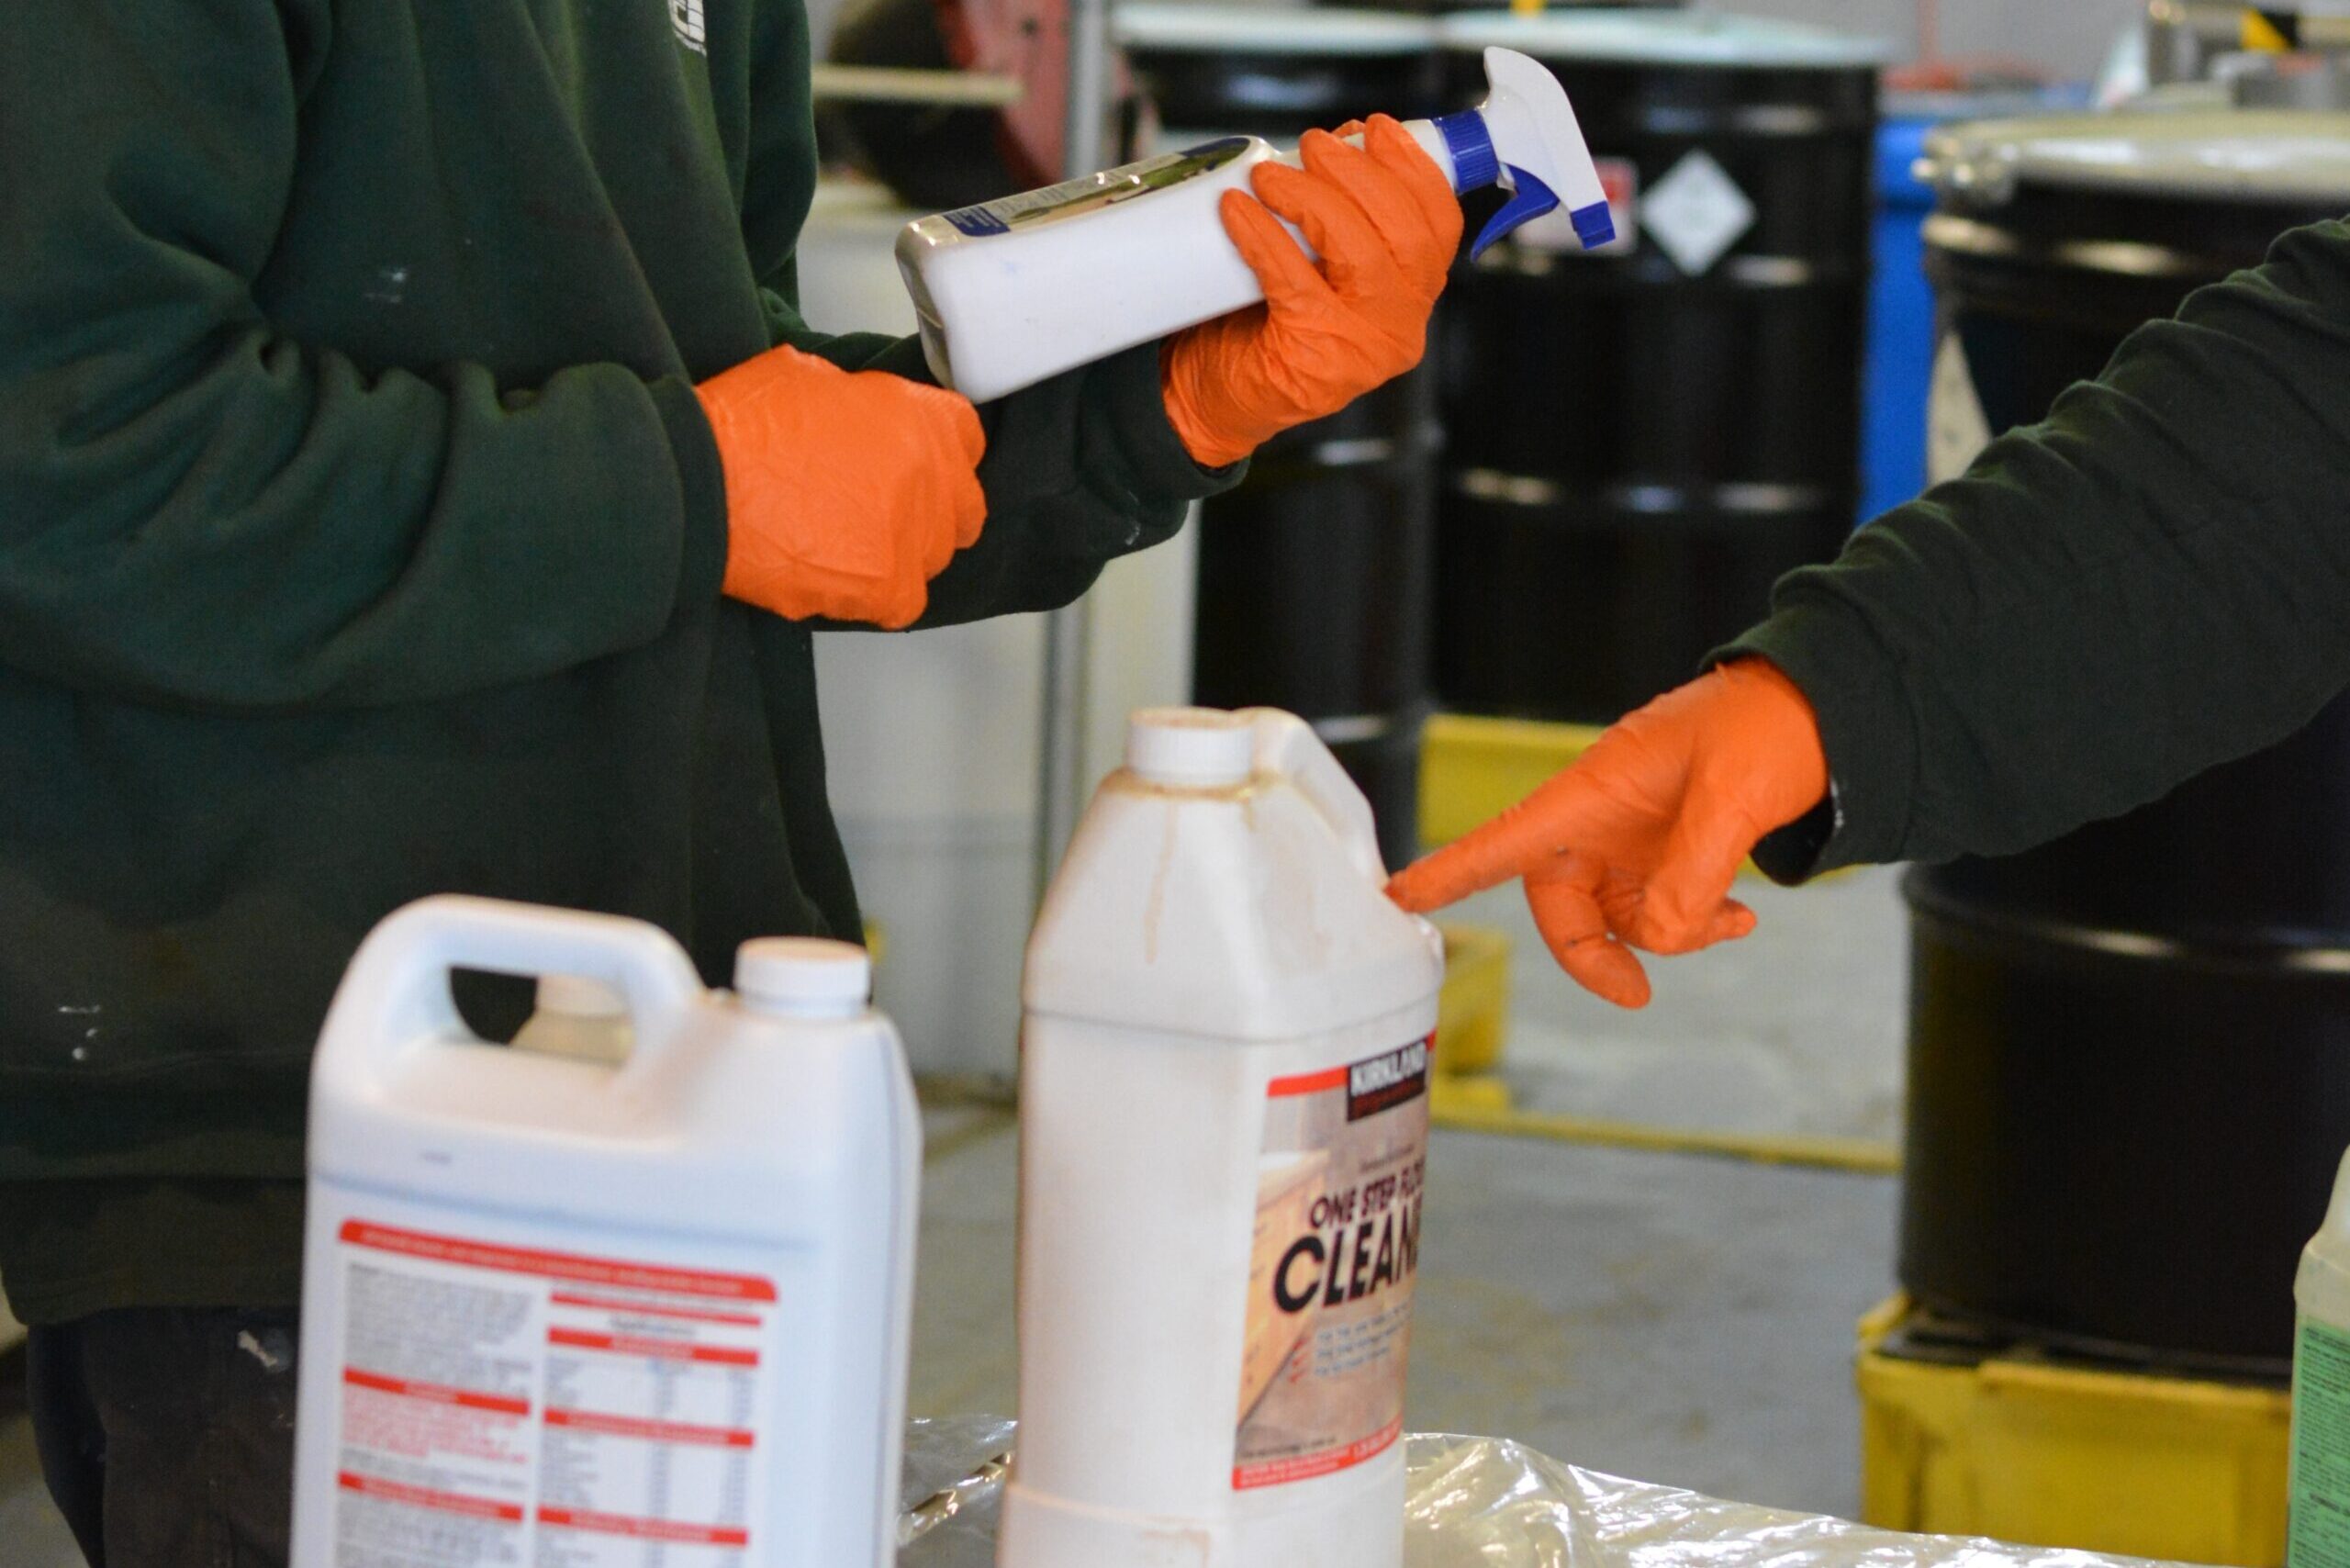 Cleaning Chemicals Not to Mix at the Risk Creating Toxic Gasses